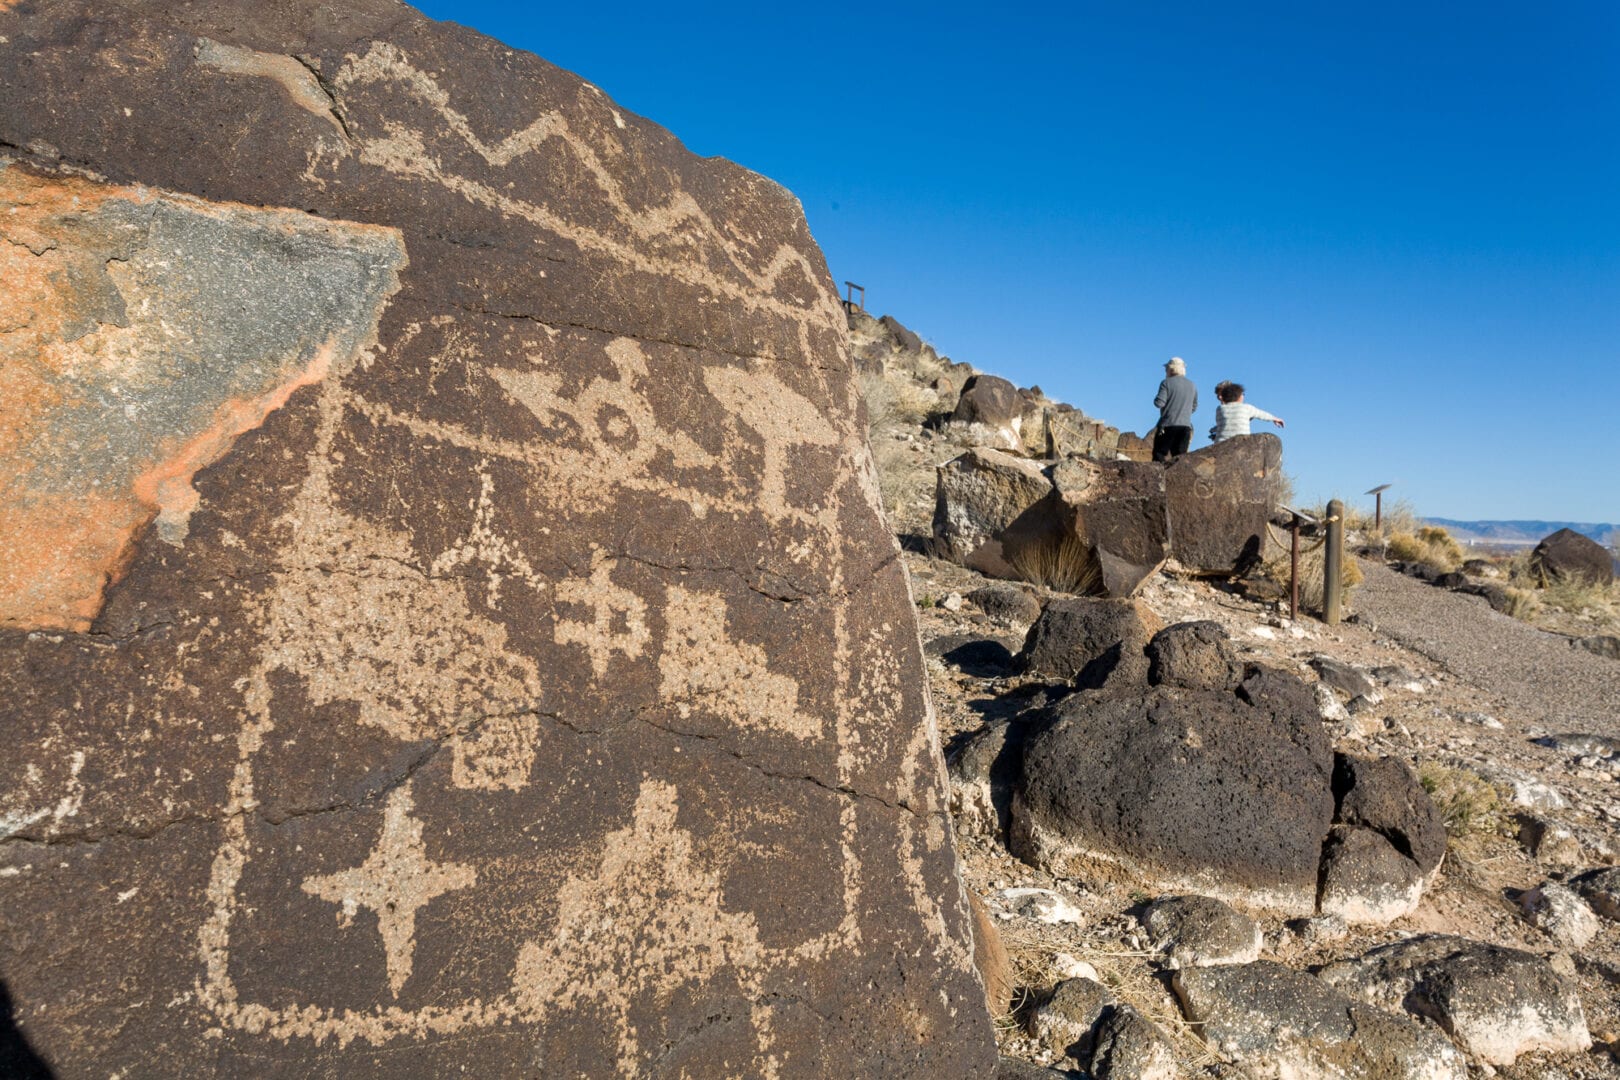 Petroglyph National Monument is located on the volcanic escarpment west of Albuquerque. It contains over 20,000 petroglyphs carved by American Indians and Spanish Settlers 400-700 years ago